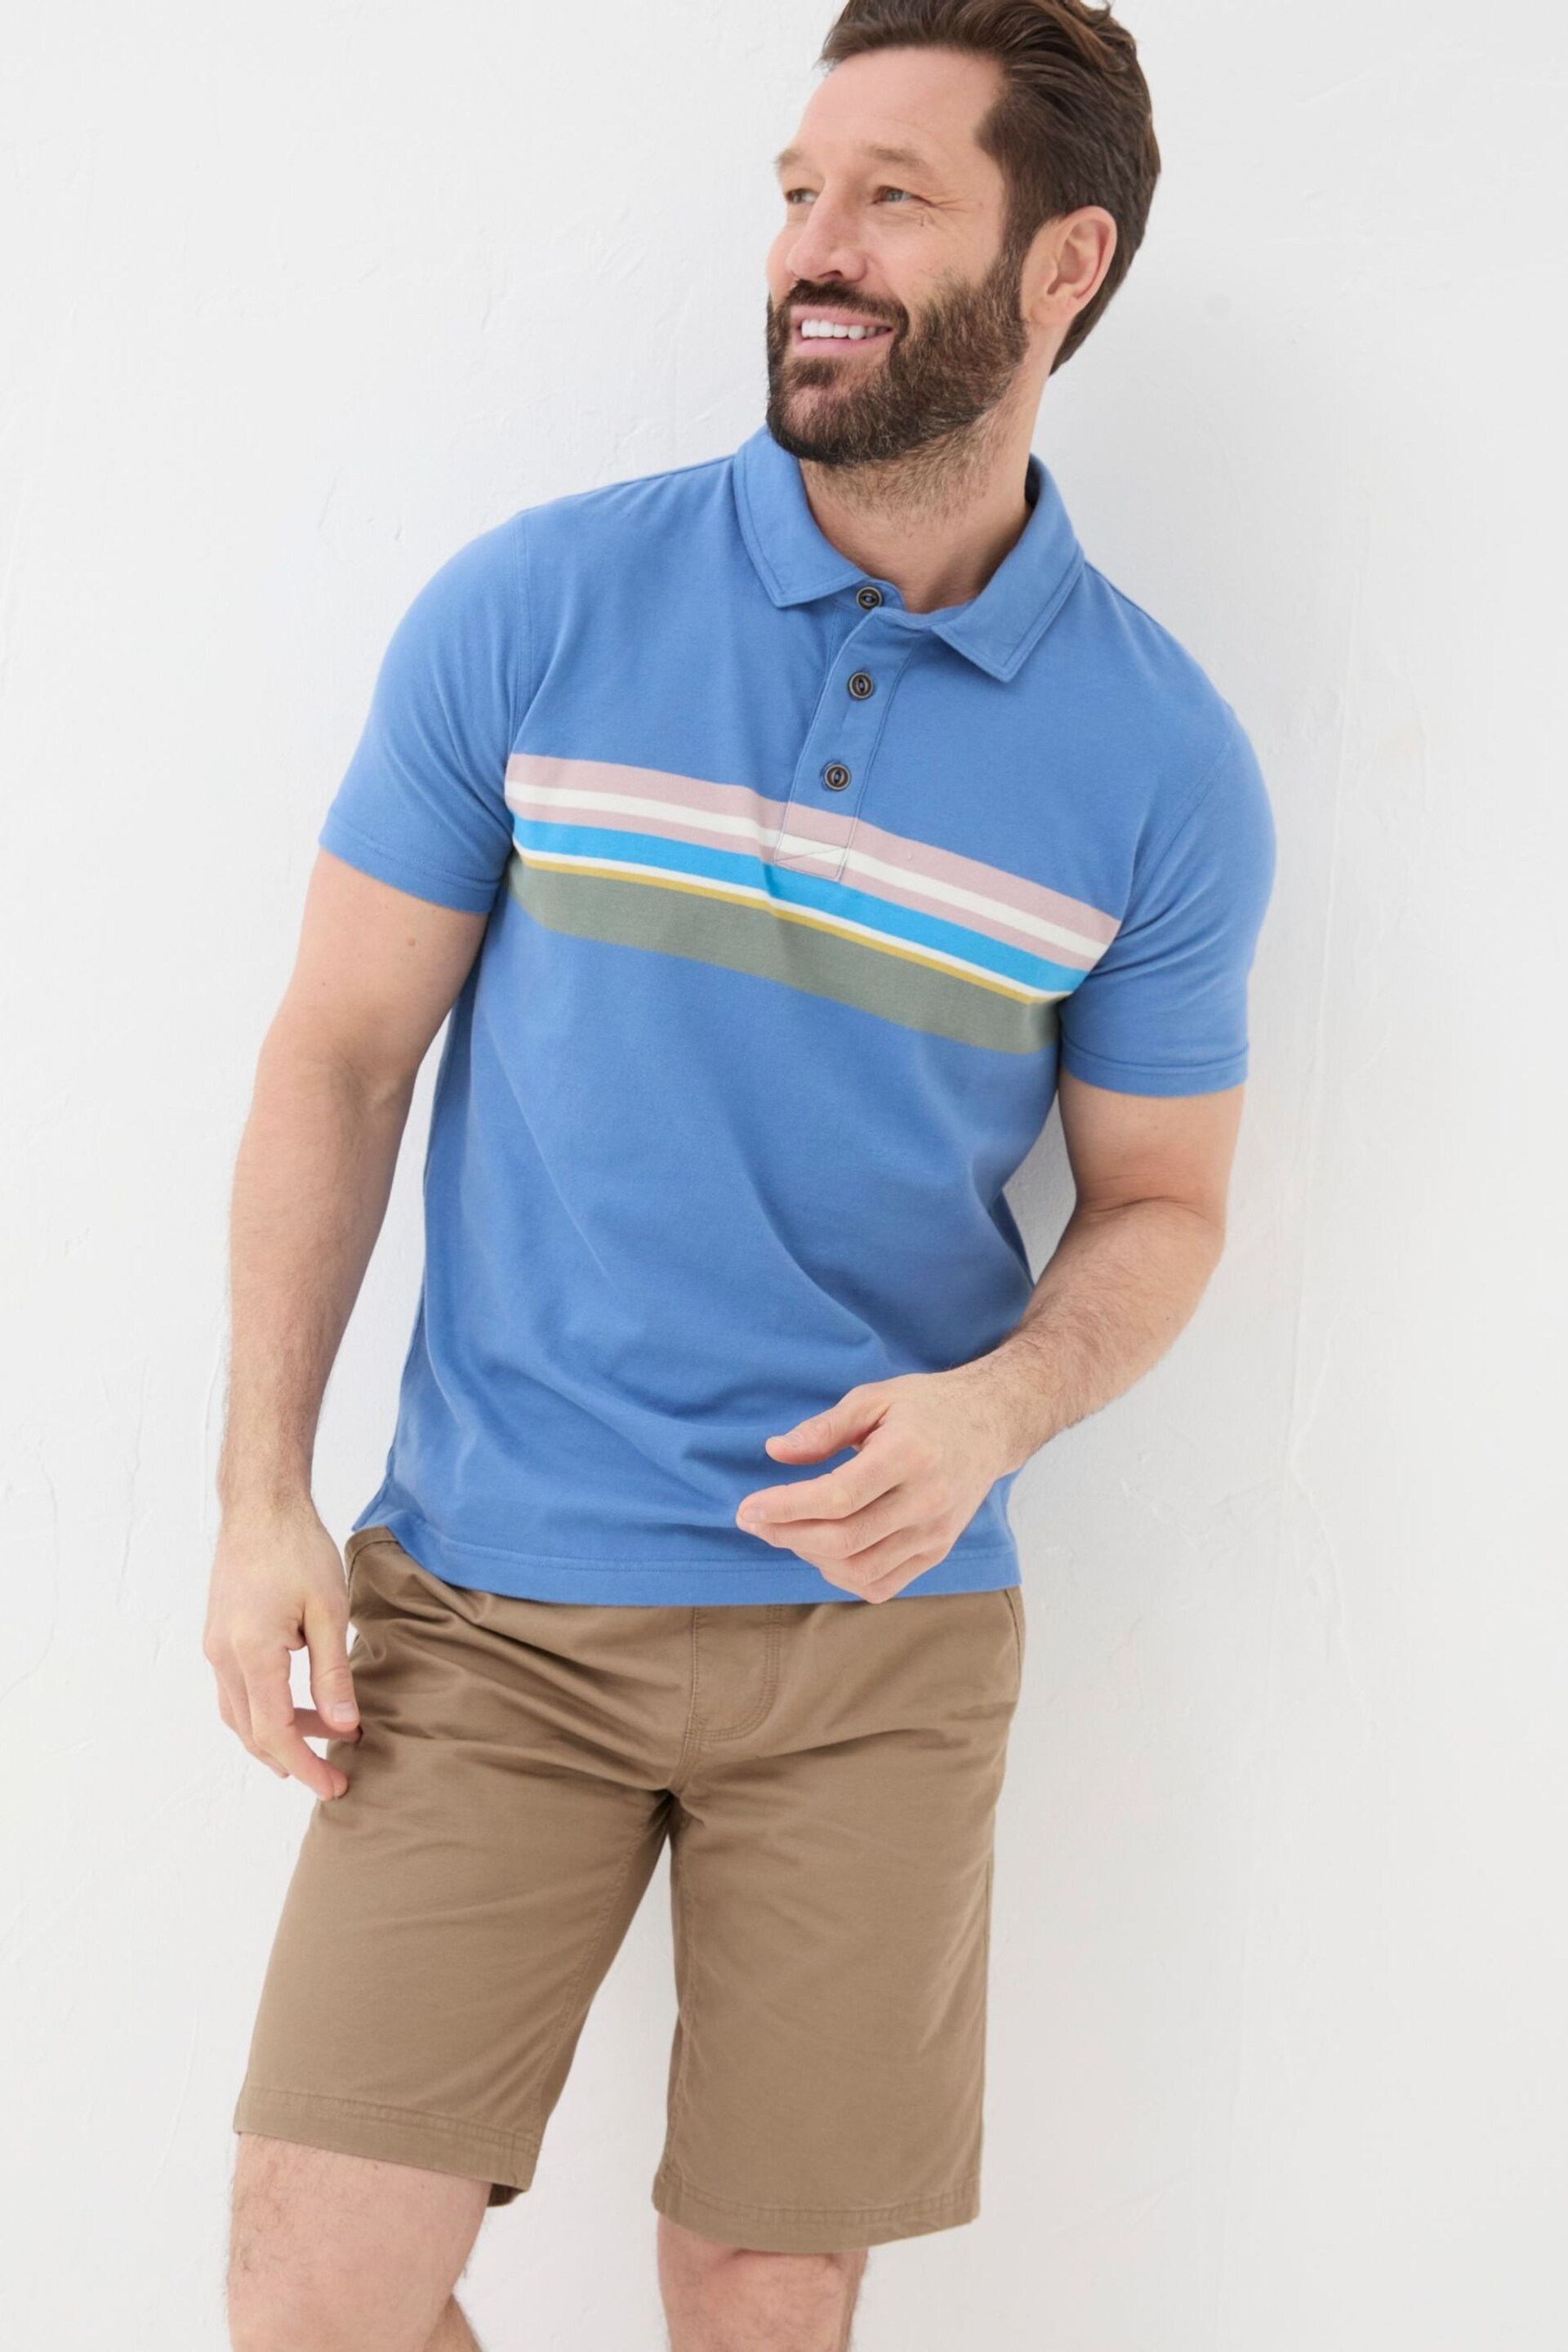 FatFace Blue Chest Stripe Polo Shirt - Image 1 of 5